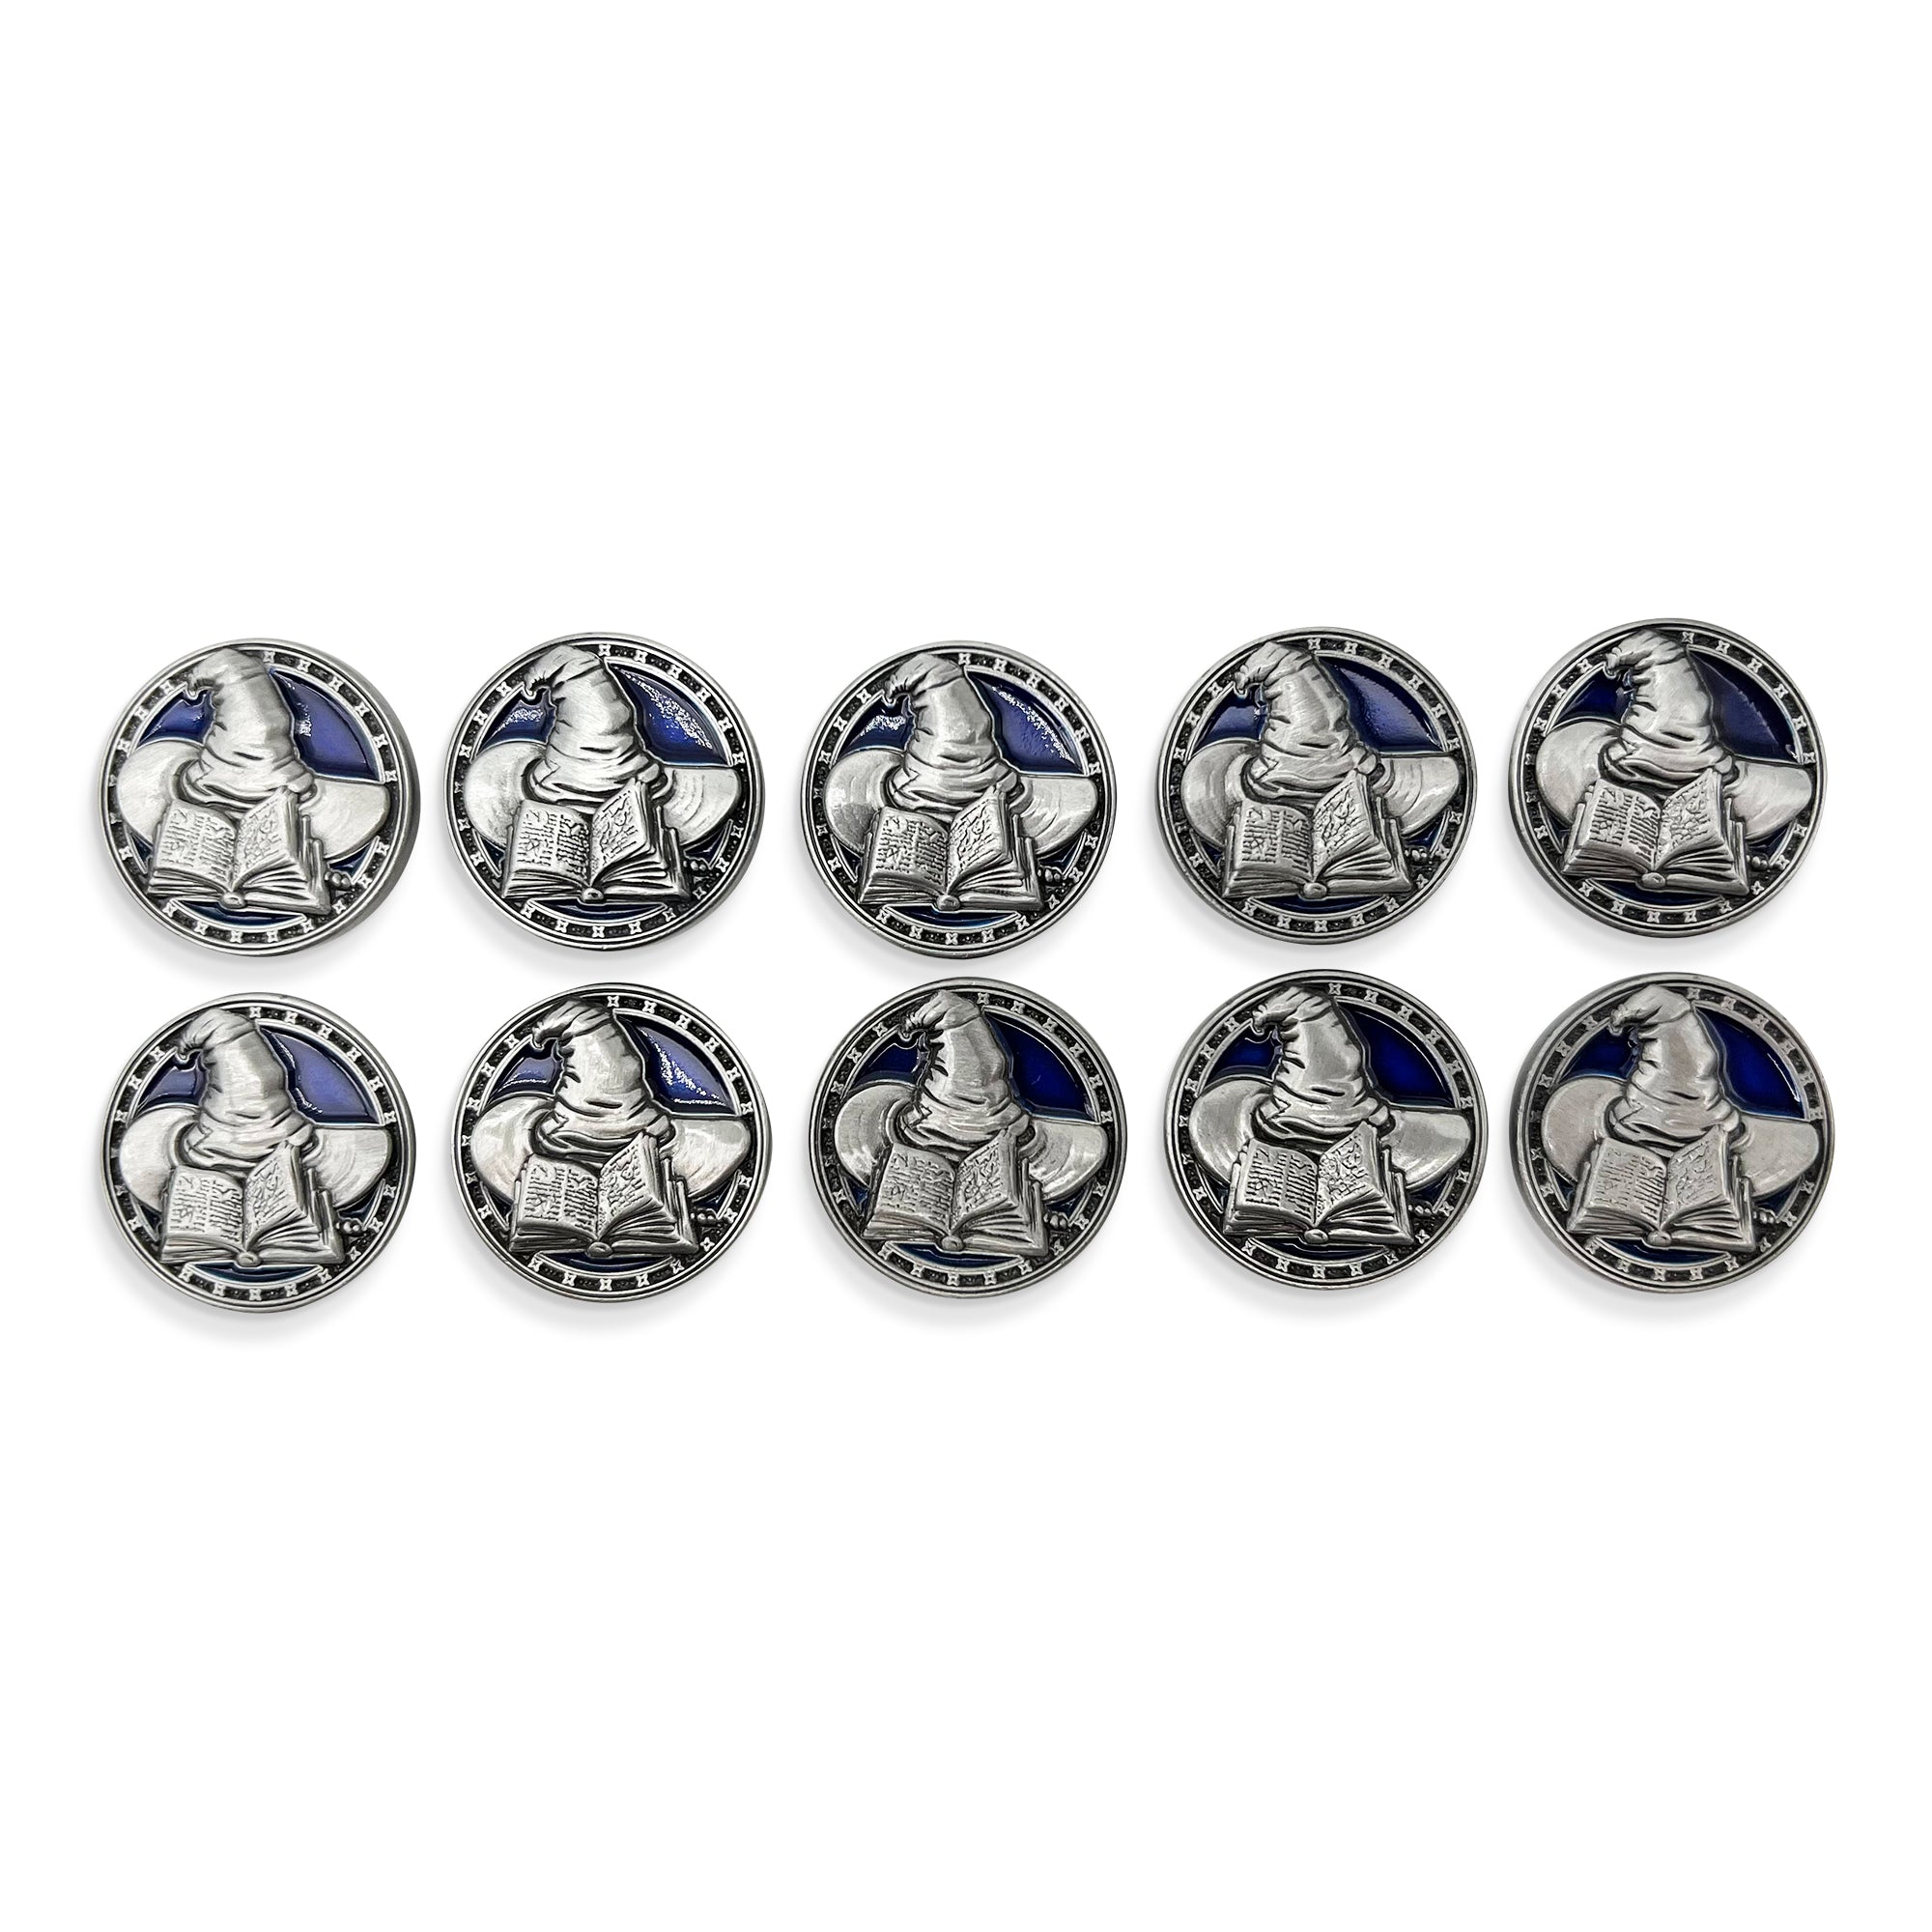 Profession Coins - Wizard Metal Coins Set of 10 - NOR 03420